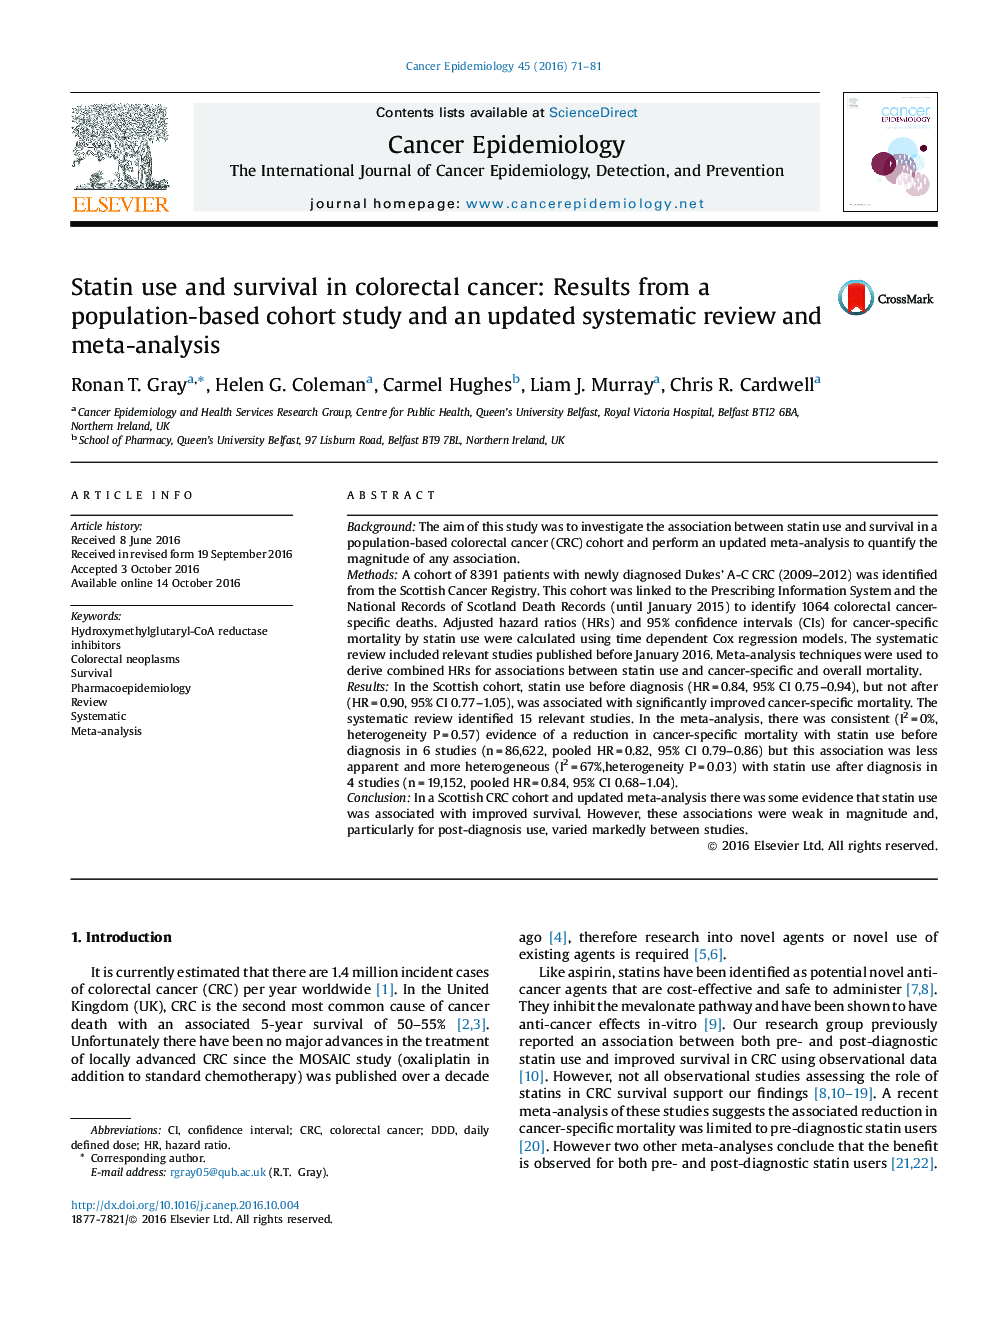 Statin use and survival in colorectal cancer: Results from a population-based cohort study and an updated systematic review and meta-analysis